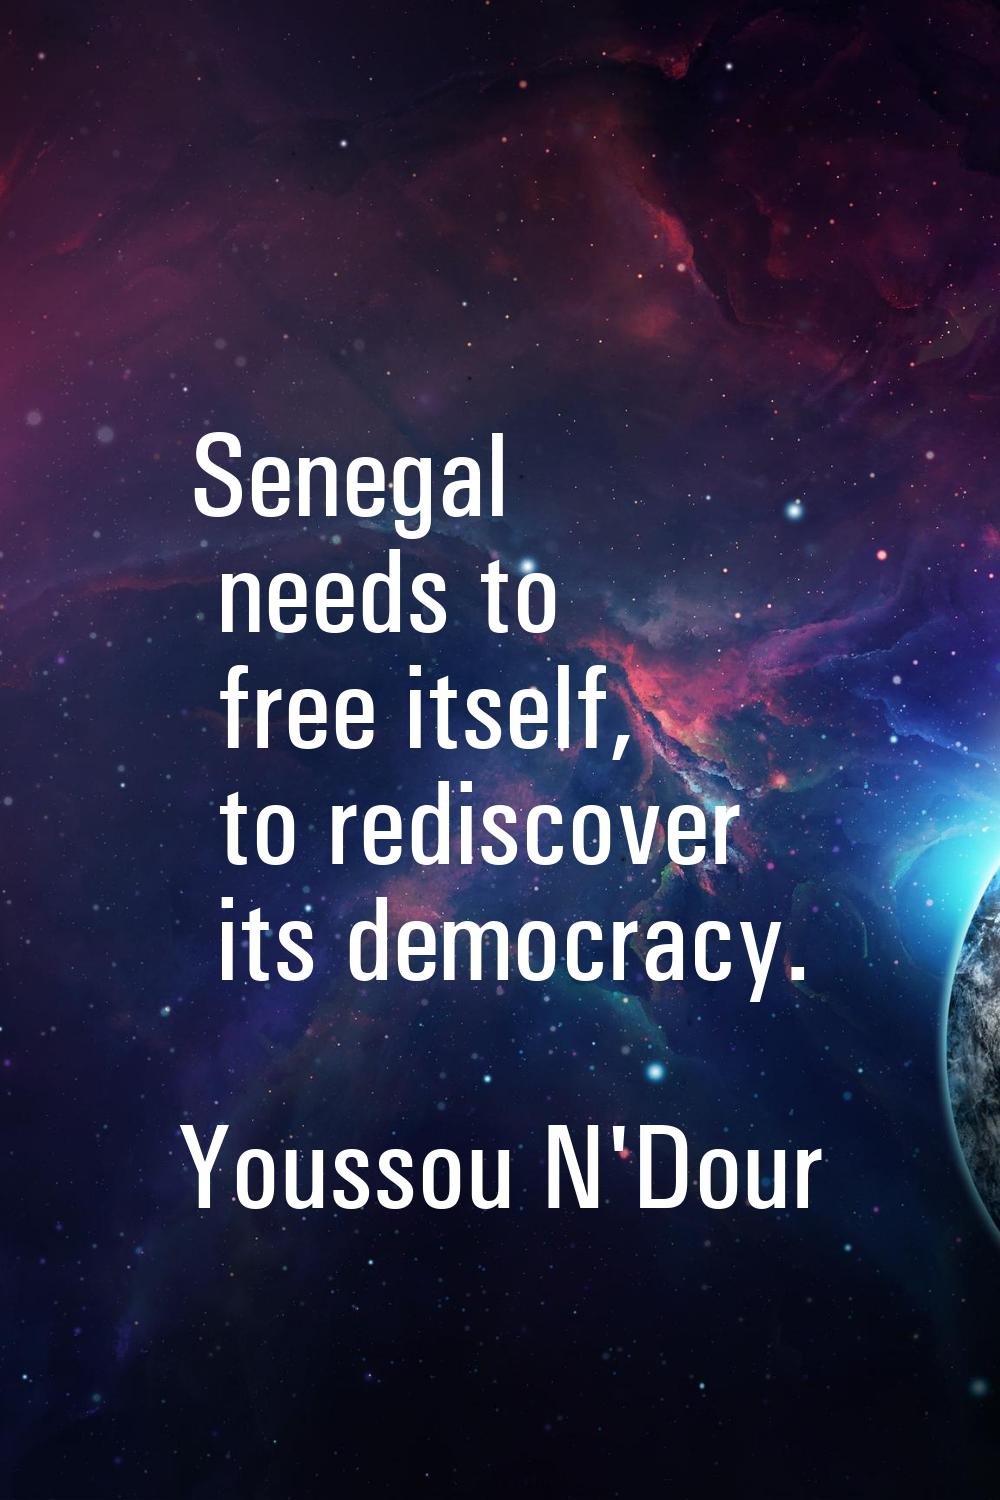 Senegal needs to free itself, to rediscover its democracy.